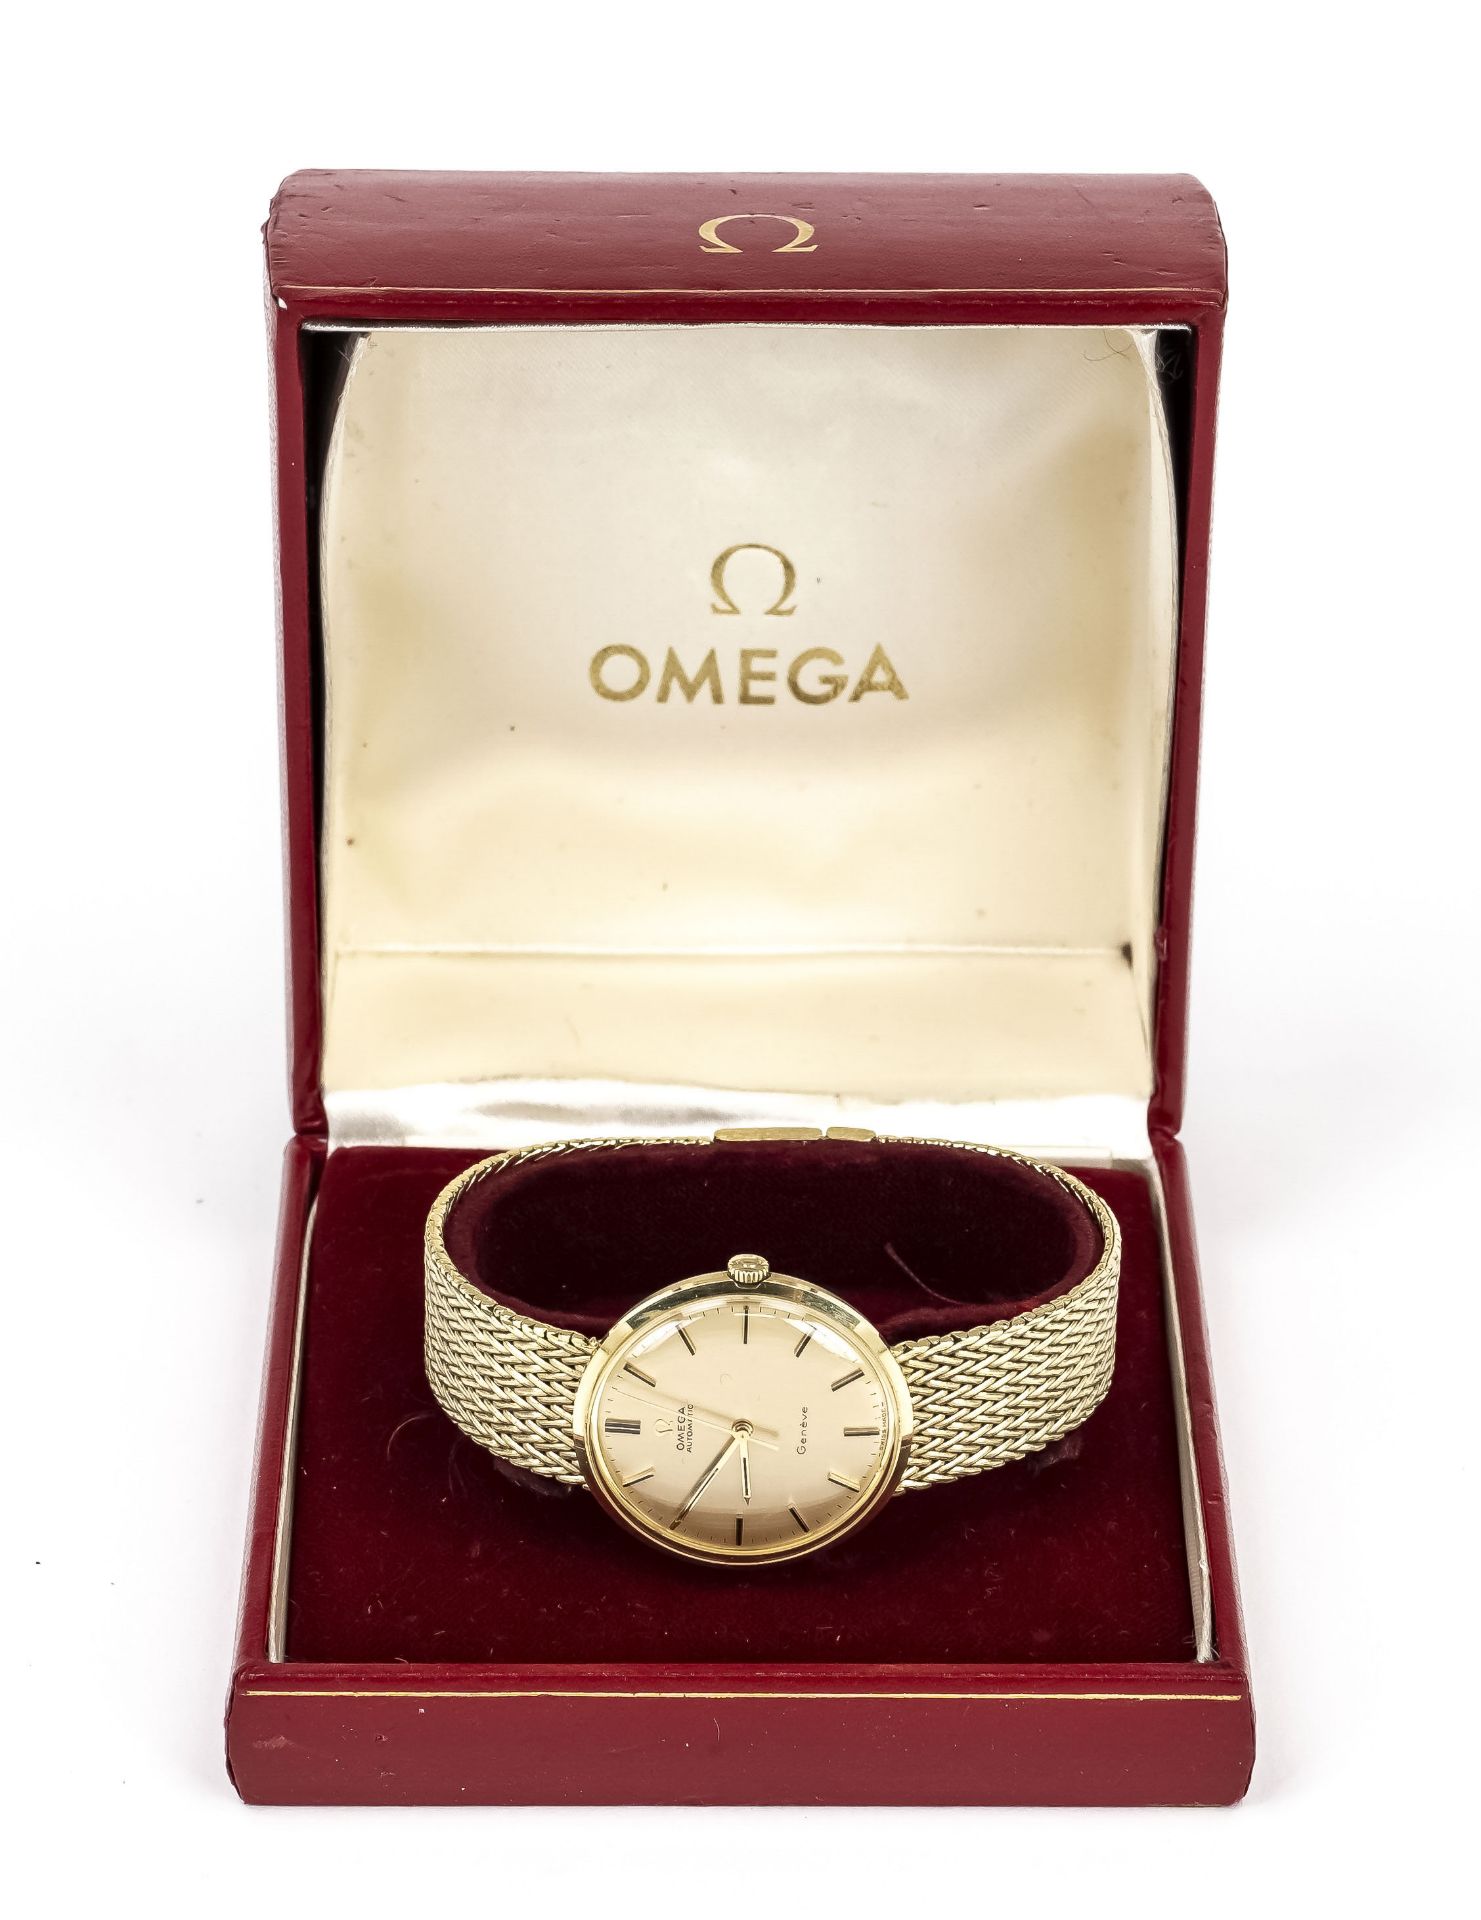 Omega gold bracelet men's watch automatic, Ref. 1211, circa 1975, 585/000 GG, gold dial with applied - Image 3 of 4